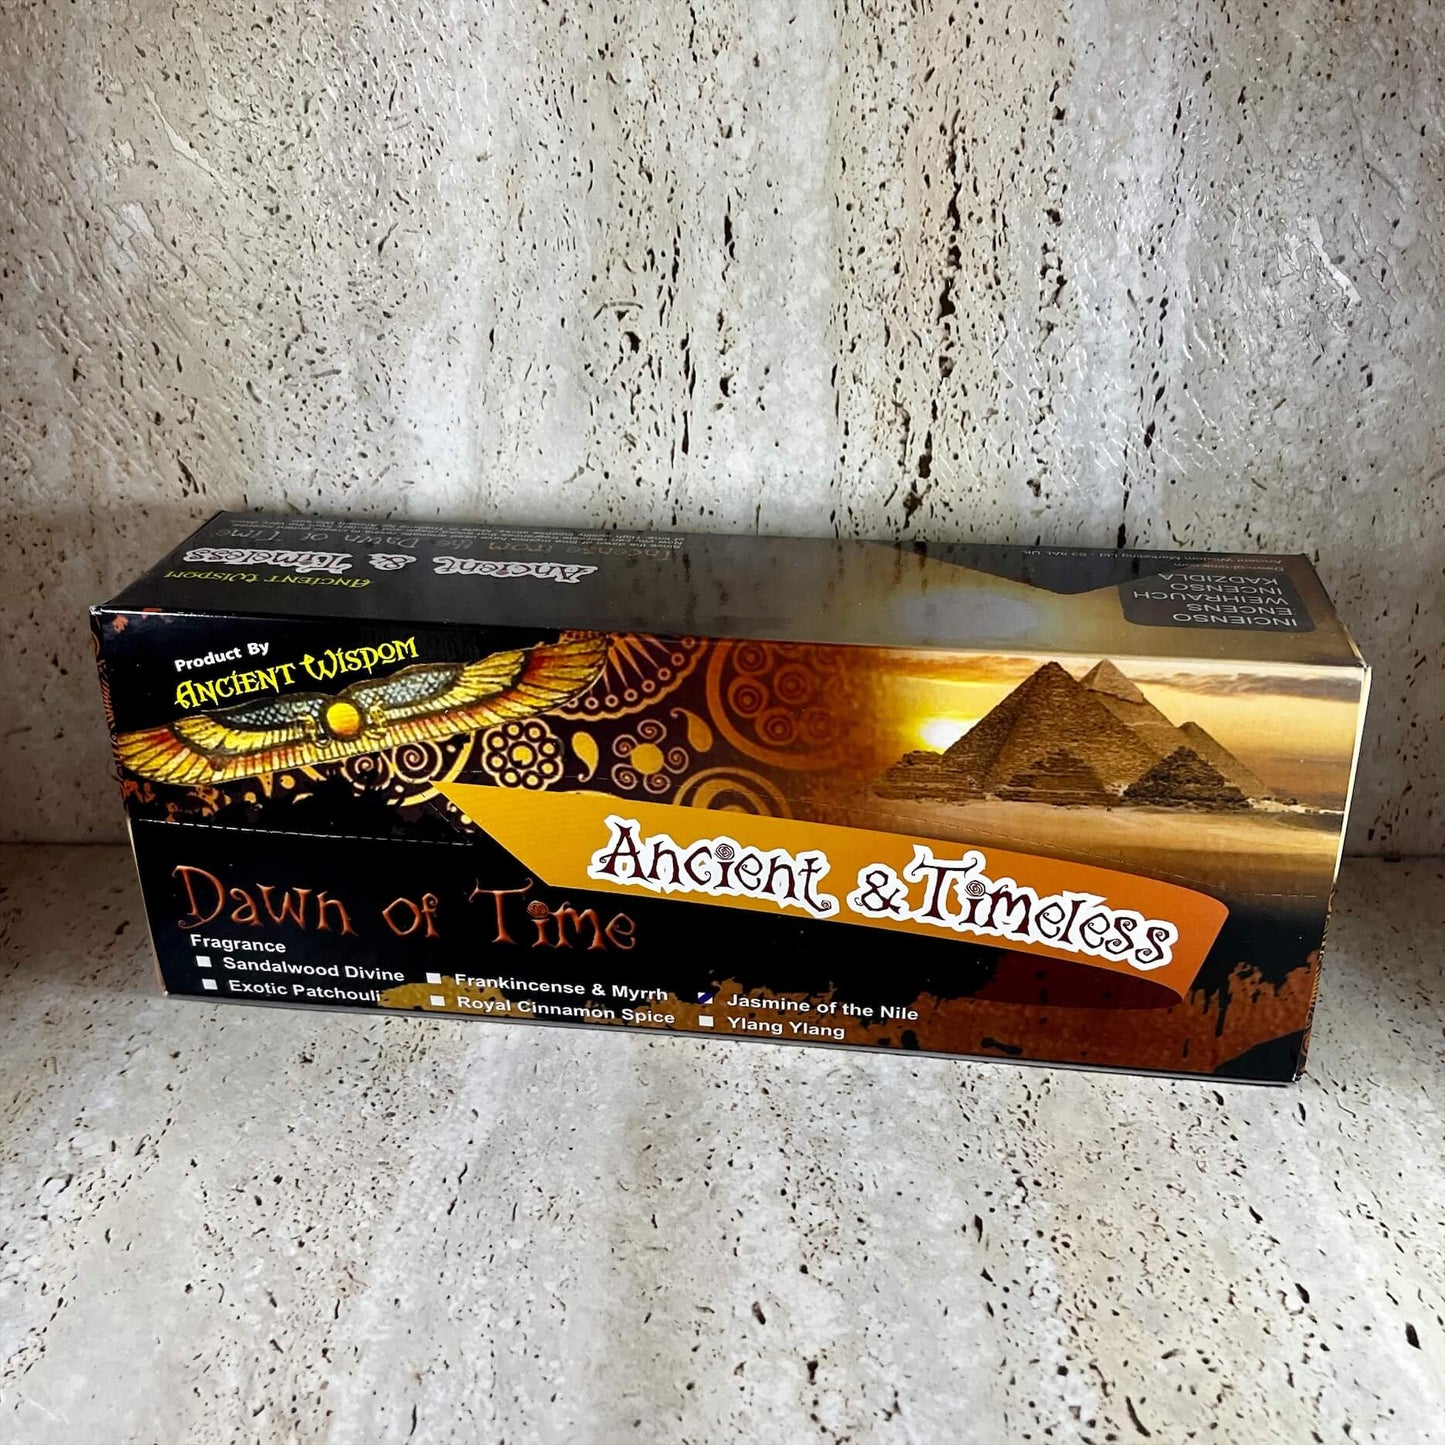 Dawn of Time Jasmine of the Nile incense